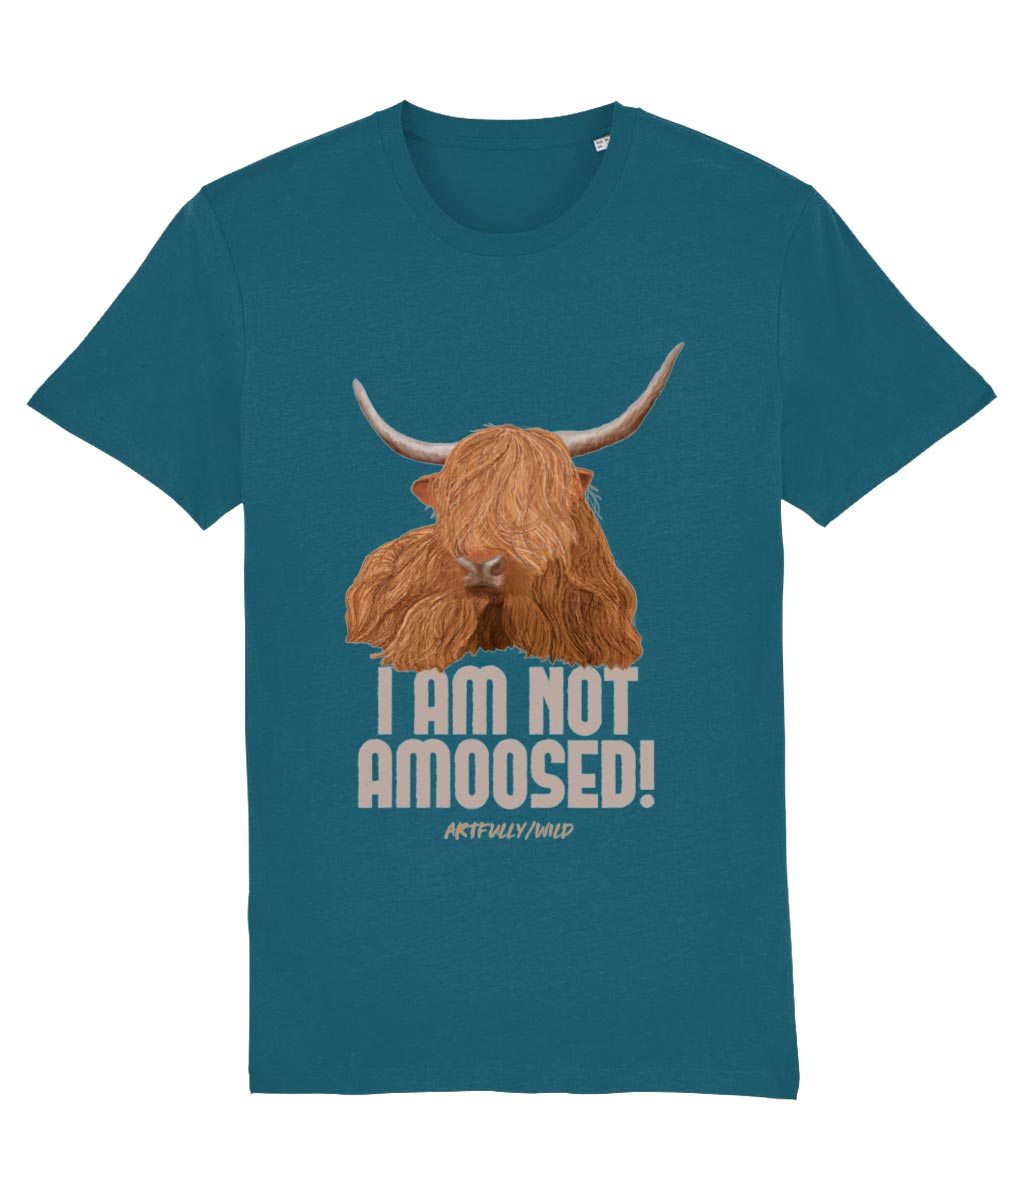 'I AM NOT AMOOSED' Print on Ocean Blue Eco-friendly T-Shirt. Unisex/Women/Men. Certified Organic Clothing. Original Highland Cow Illustration by Artfully/Wild. Printed in the UK.